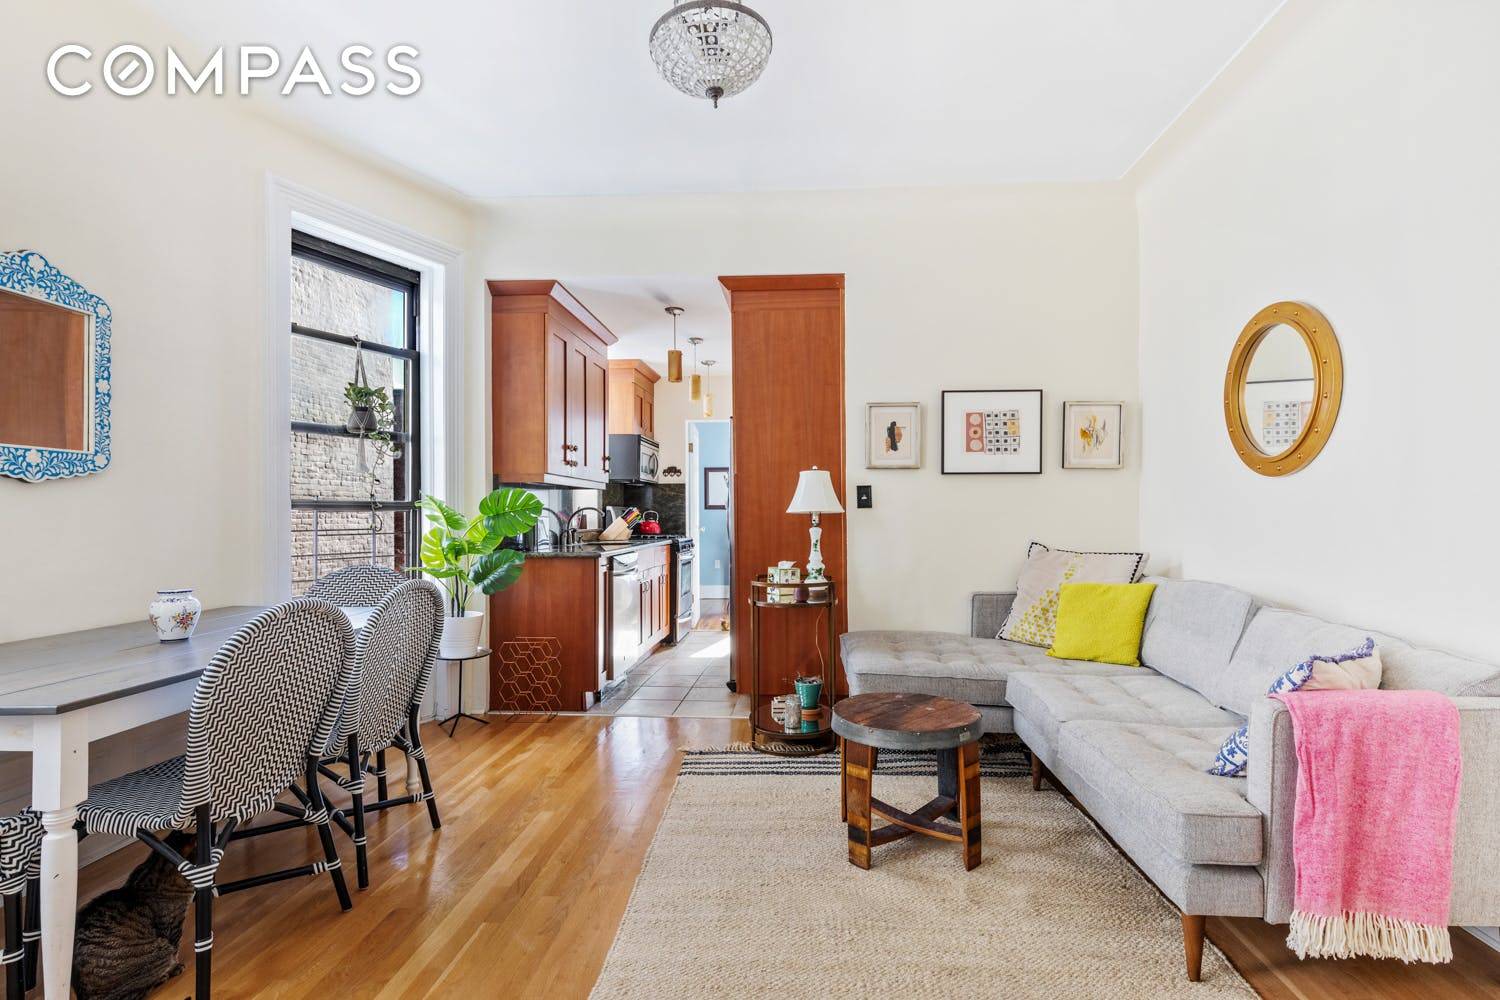 Welcome home to this spacious 2 Bedroom, 2 Bath co op in convenient North Park Slope.